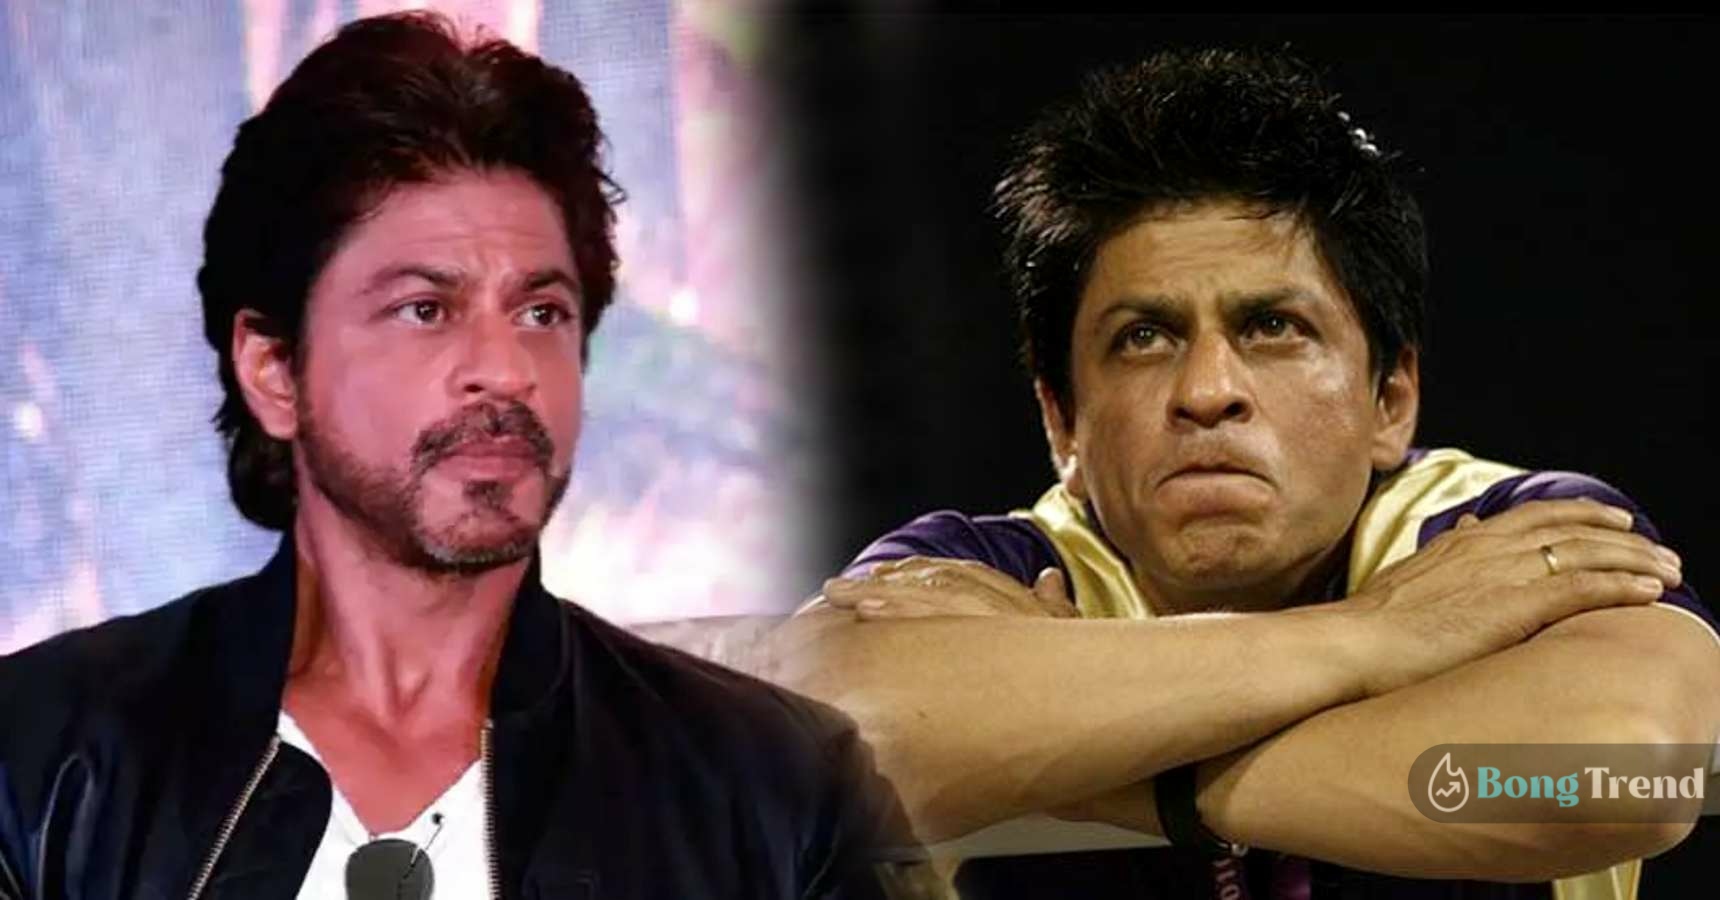 Shahrukh Khan rejected Offer for Don 3 rumours